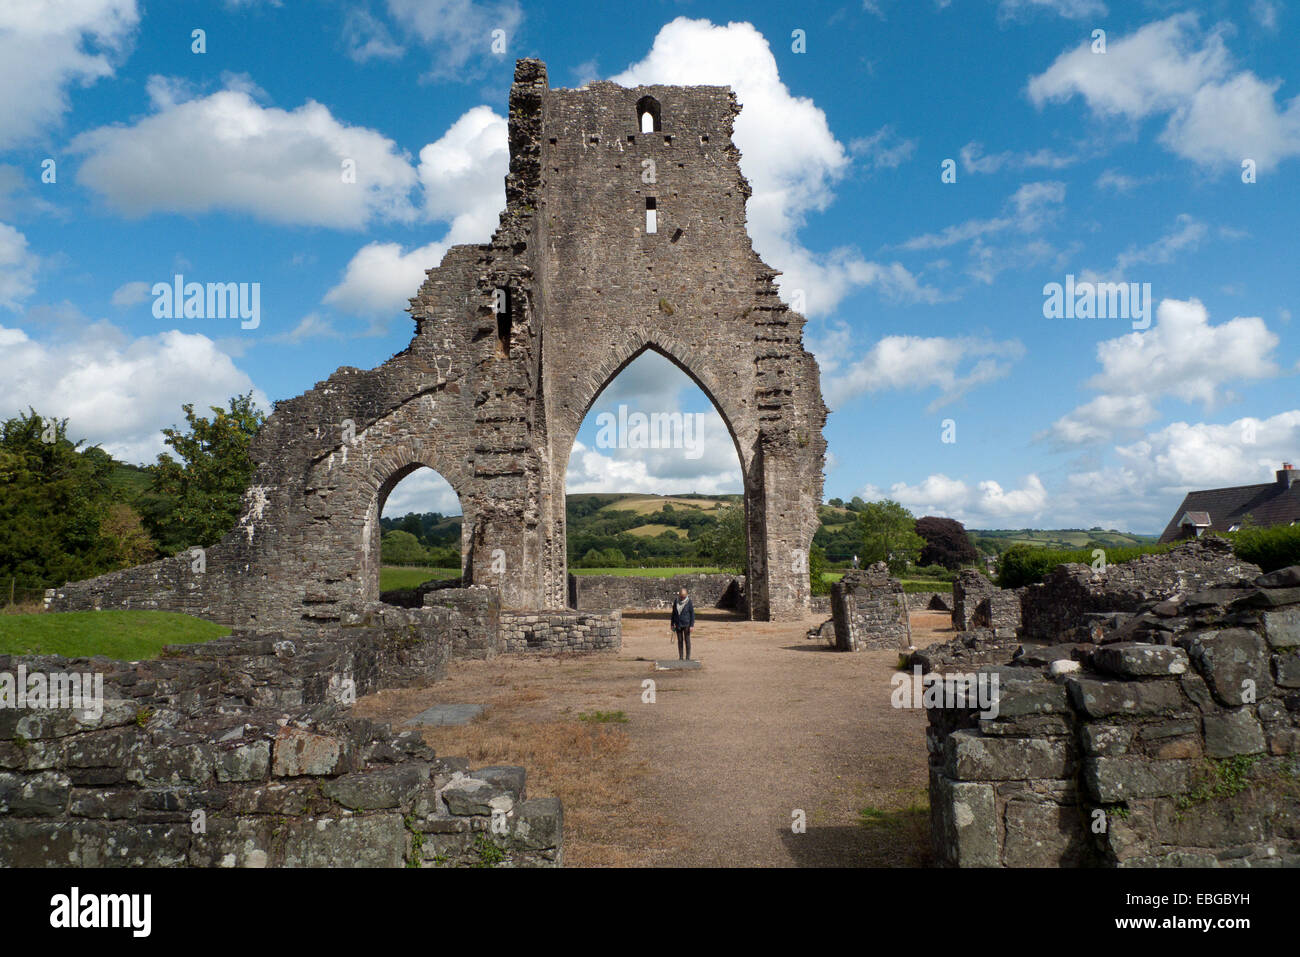 Tourist visiting Talley Abbey in Carmarthenshire Wales, UK   KATHY DEWITT Stock Photo